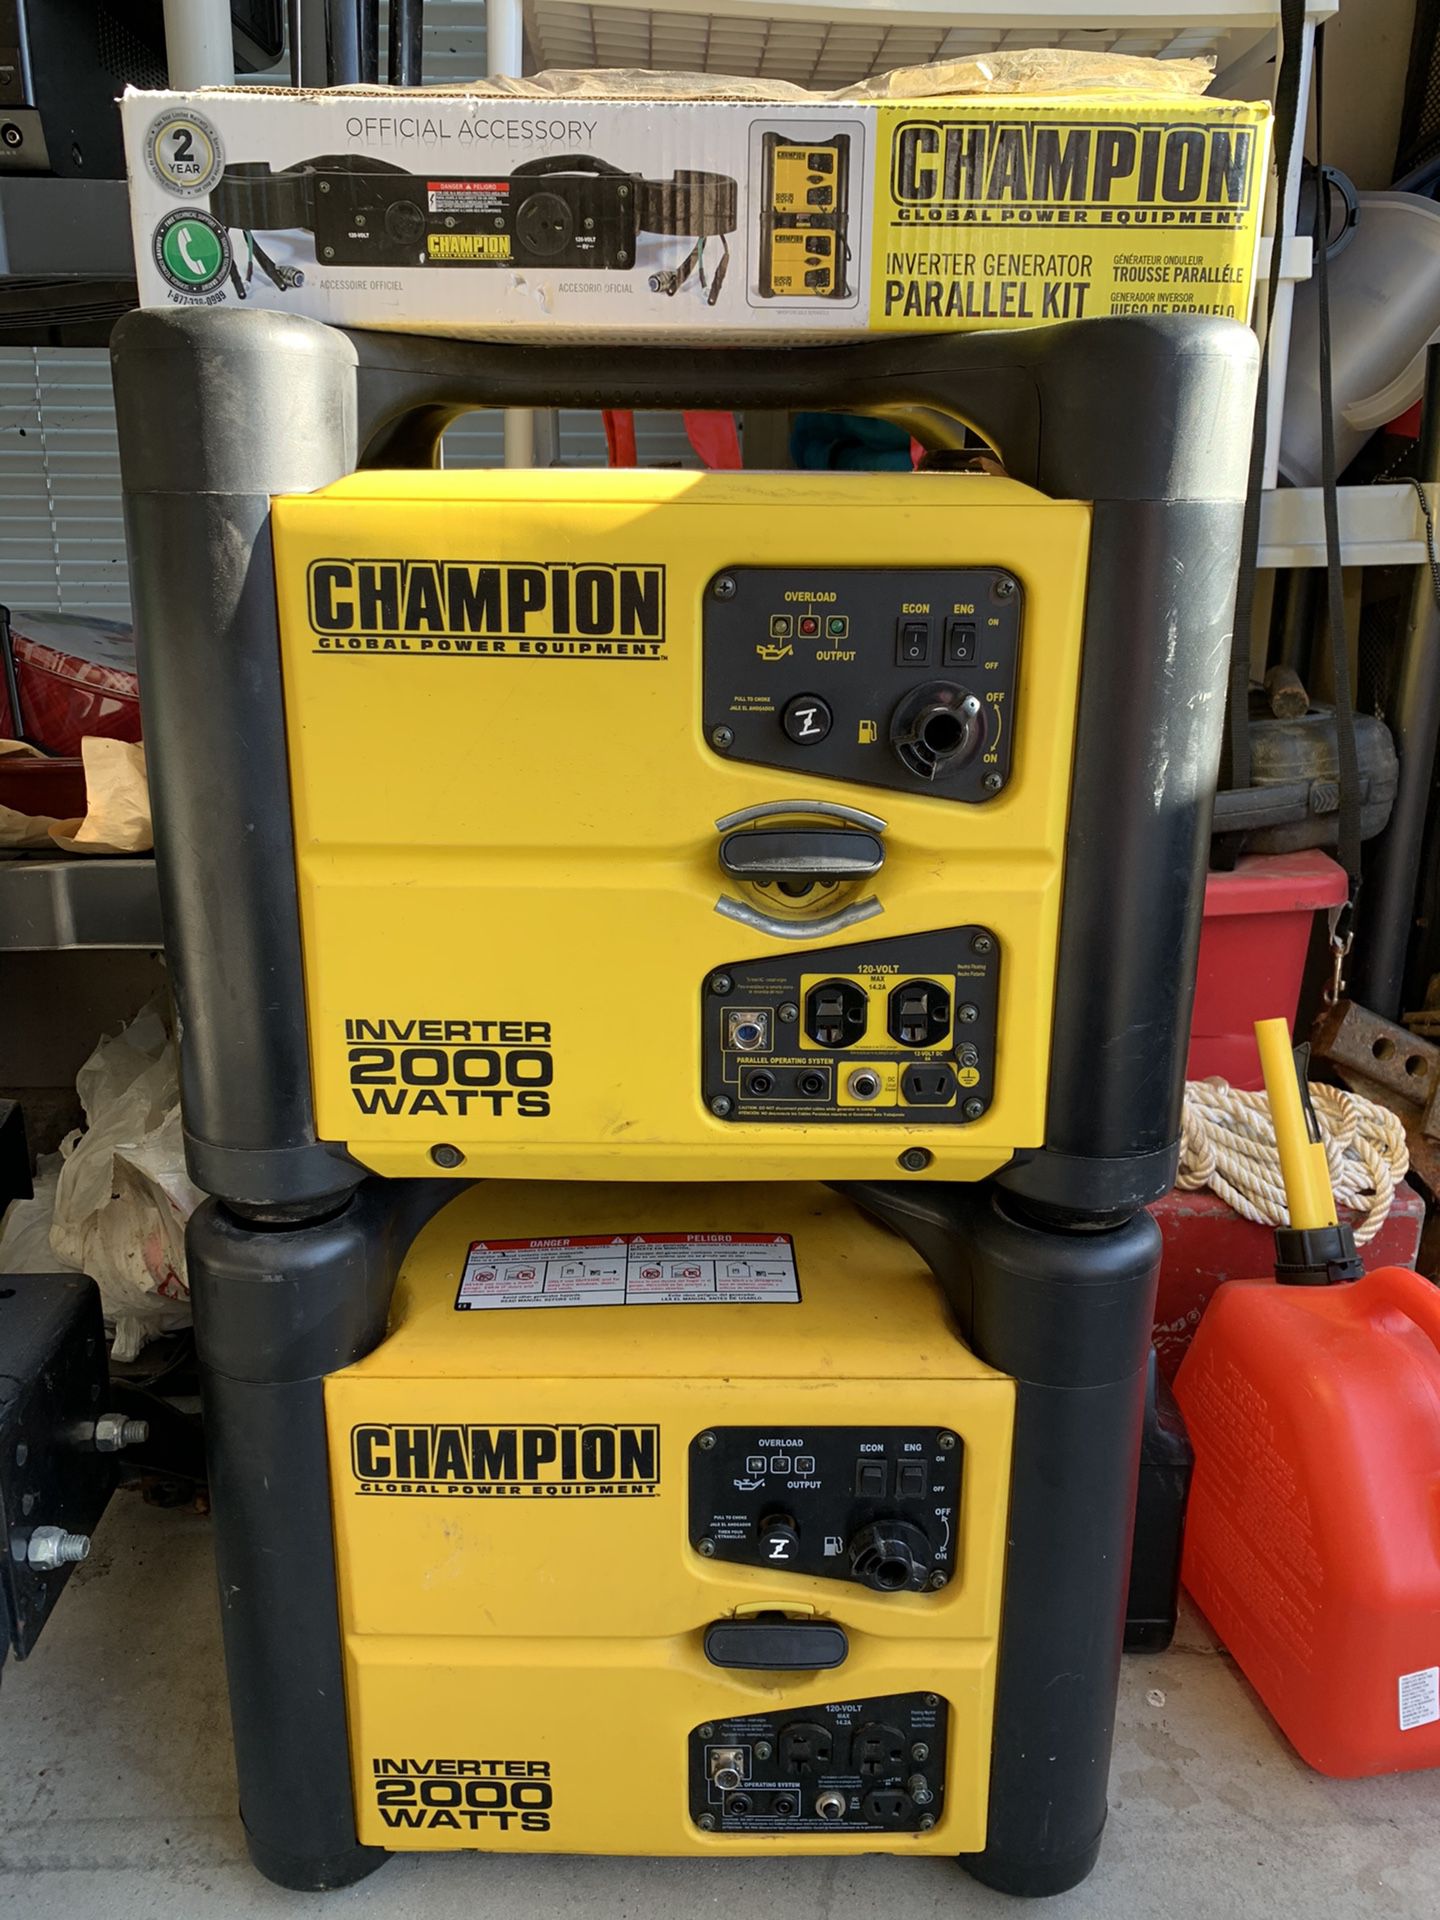 2-2000 watt champion stackable generators with connector kit 2 years old $1050 new used 3 Times